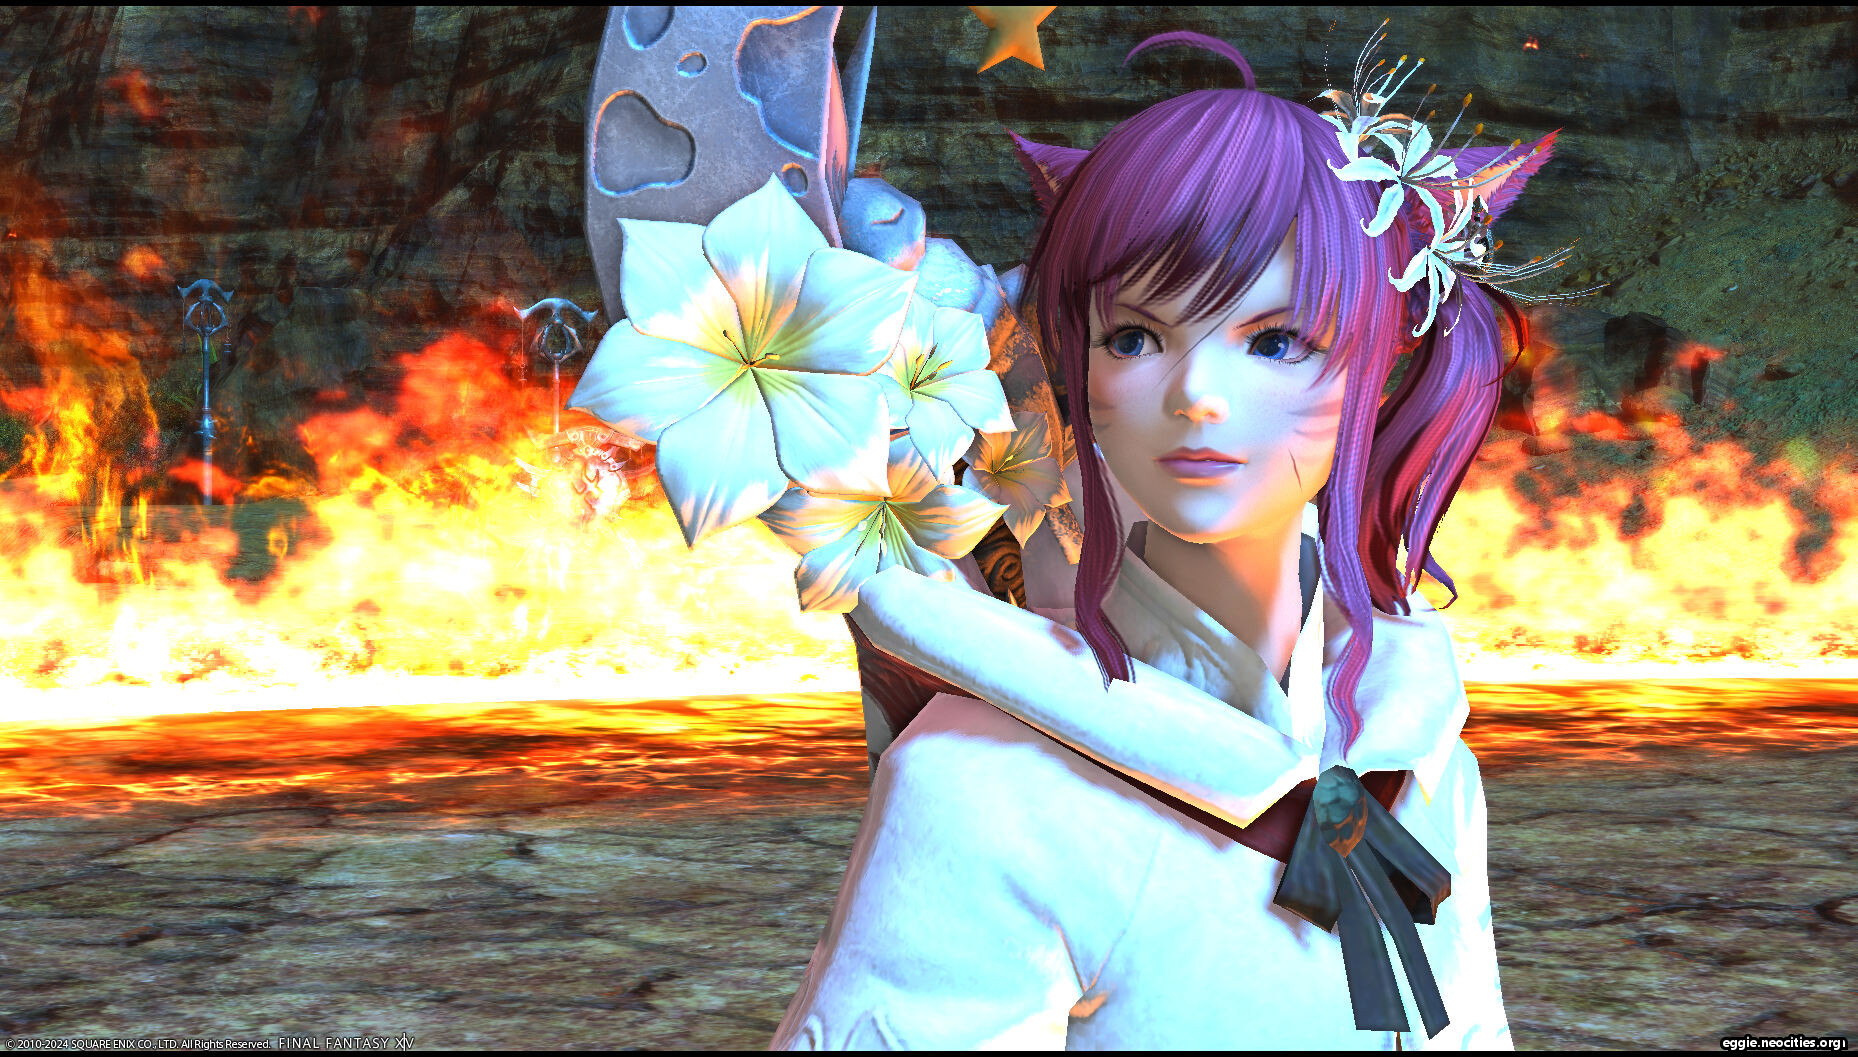 Zel with a determined expression, with Ifrit's flames in the background.